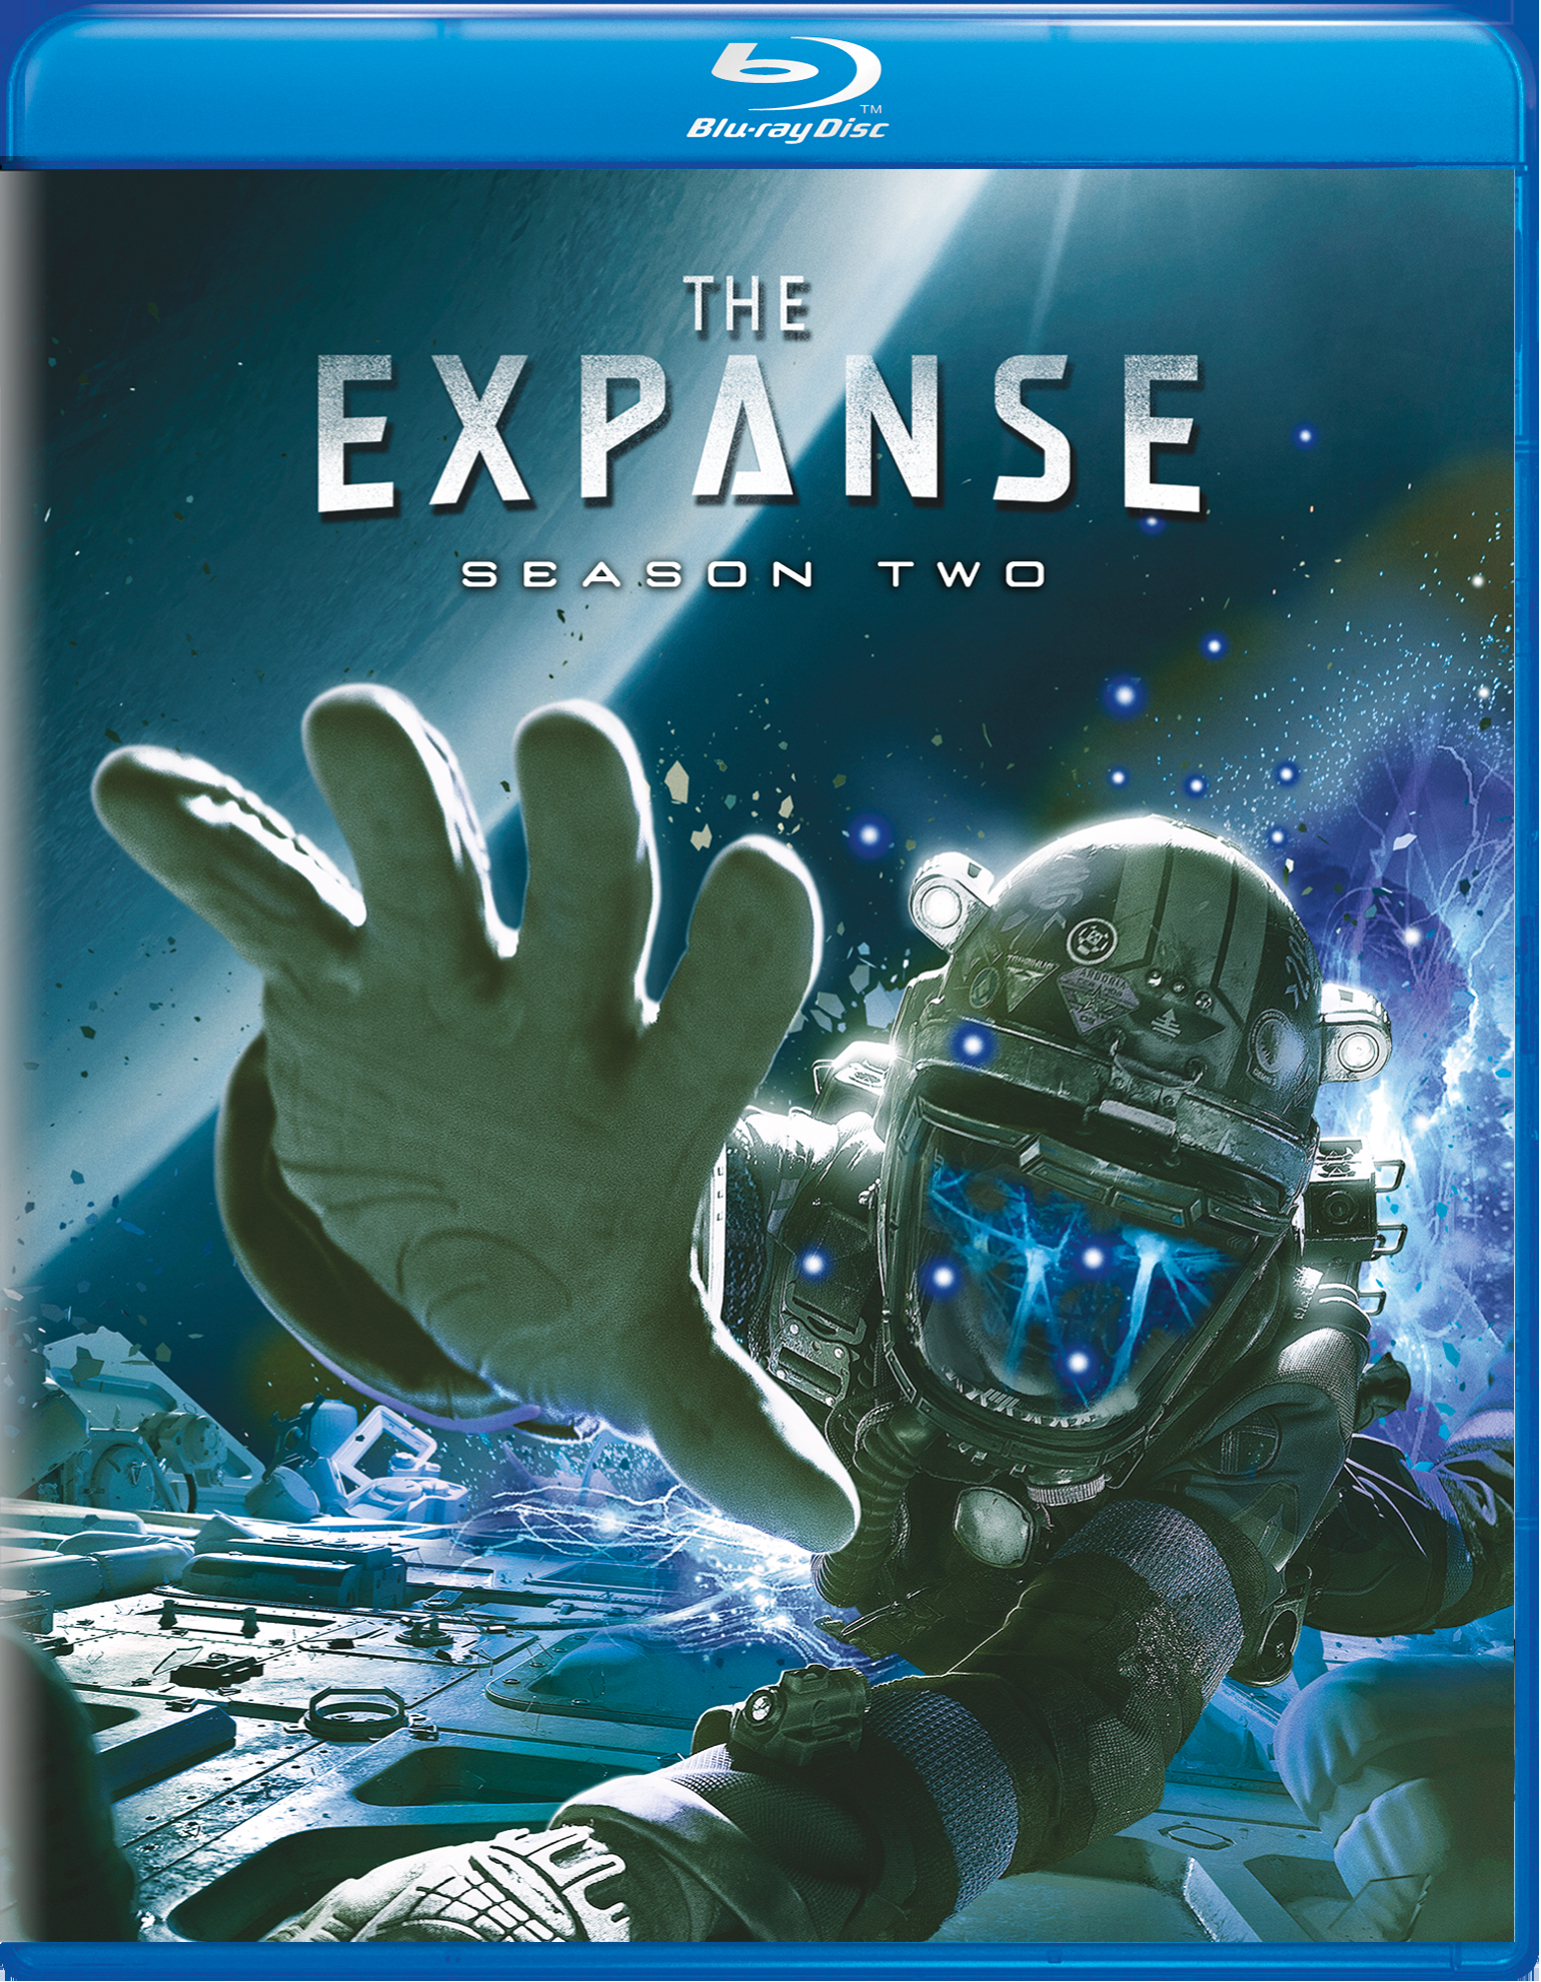 The Expanse: Season Two (Blu-ray New Box Art) - Blu-ray [ 2017 ]  - Sci Fi Television On Blu-ray - TV Shows On GRUV